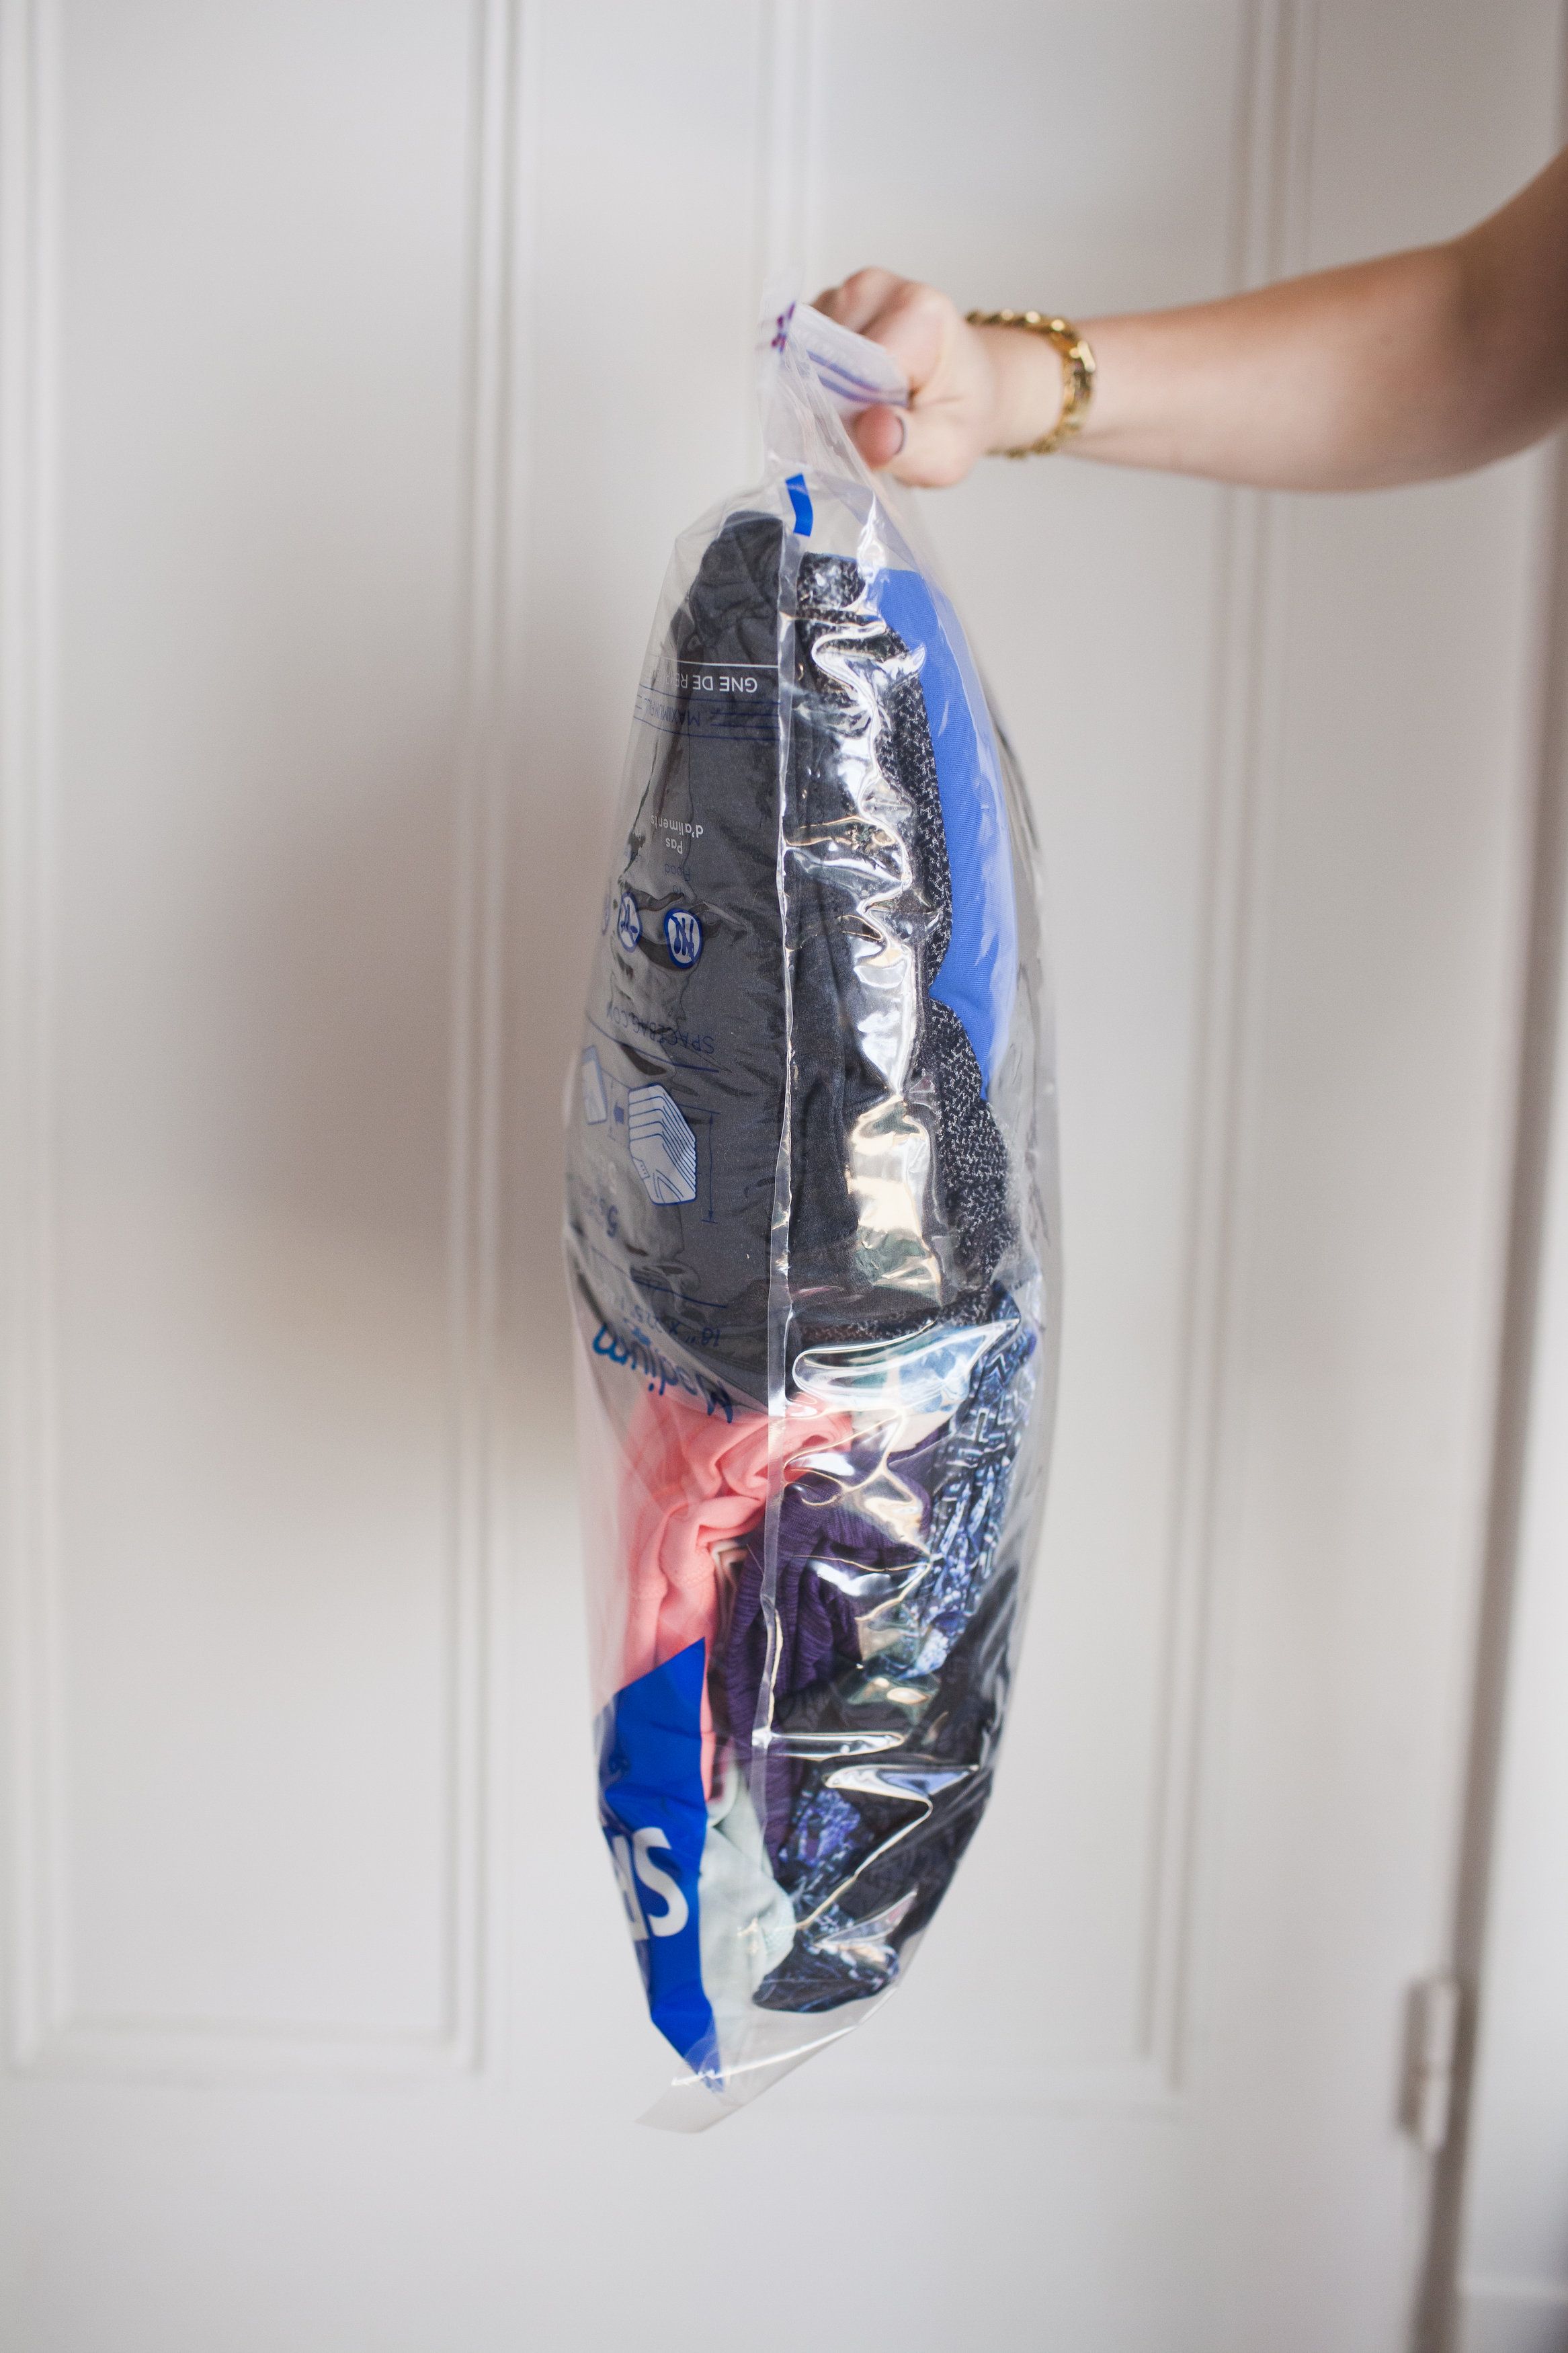 Do Space Bags Really Work?